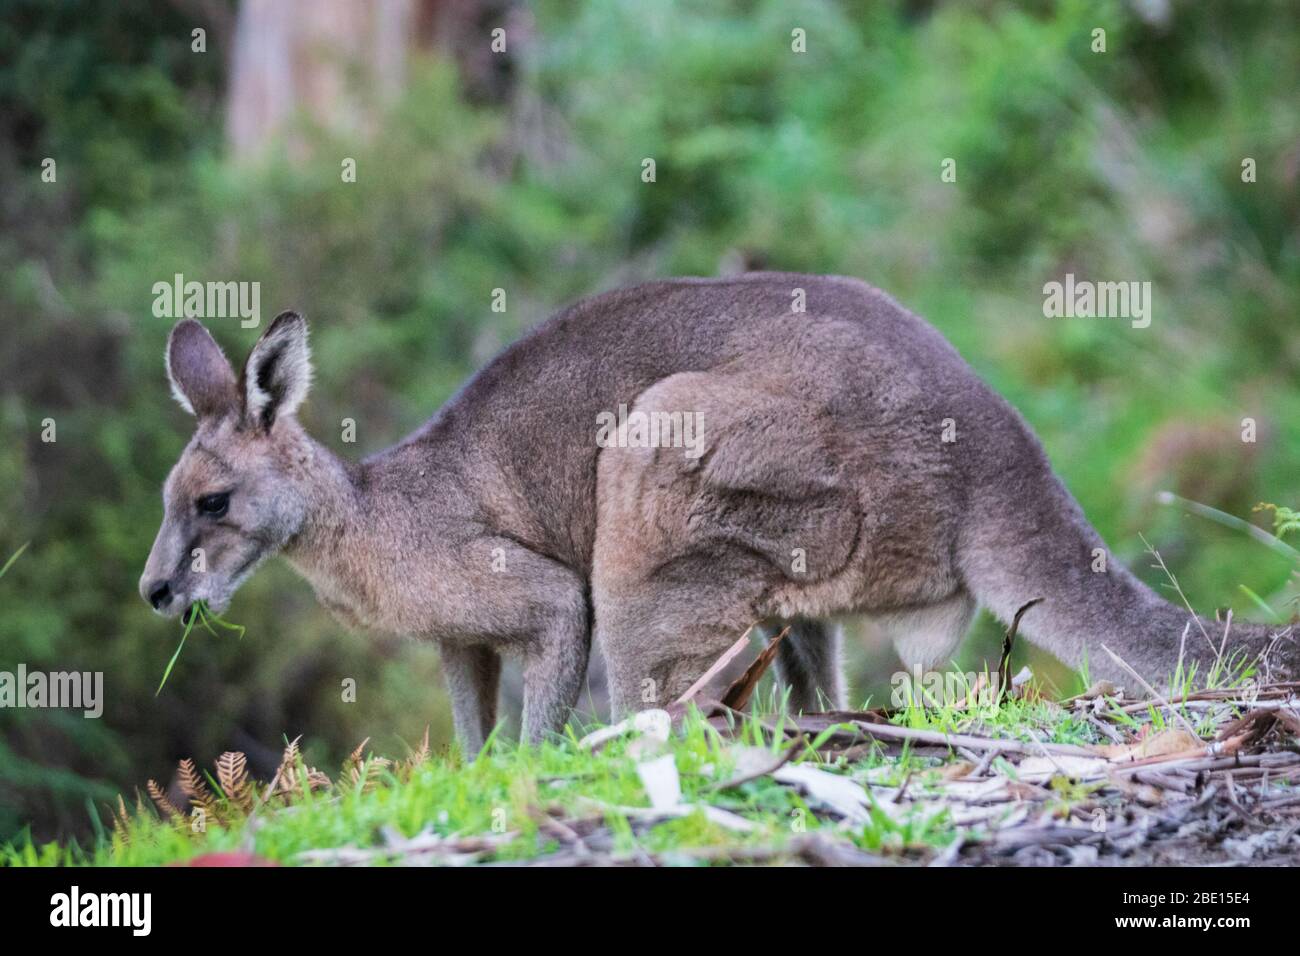 Close up of a Kanagroo in Kennett River, Australia Stock Photo